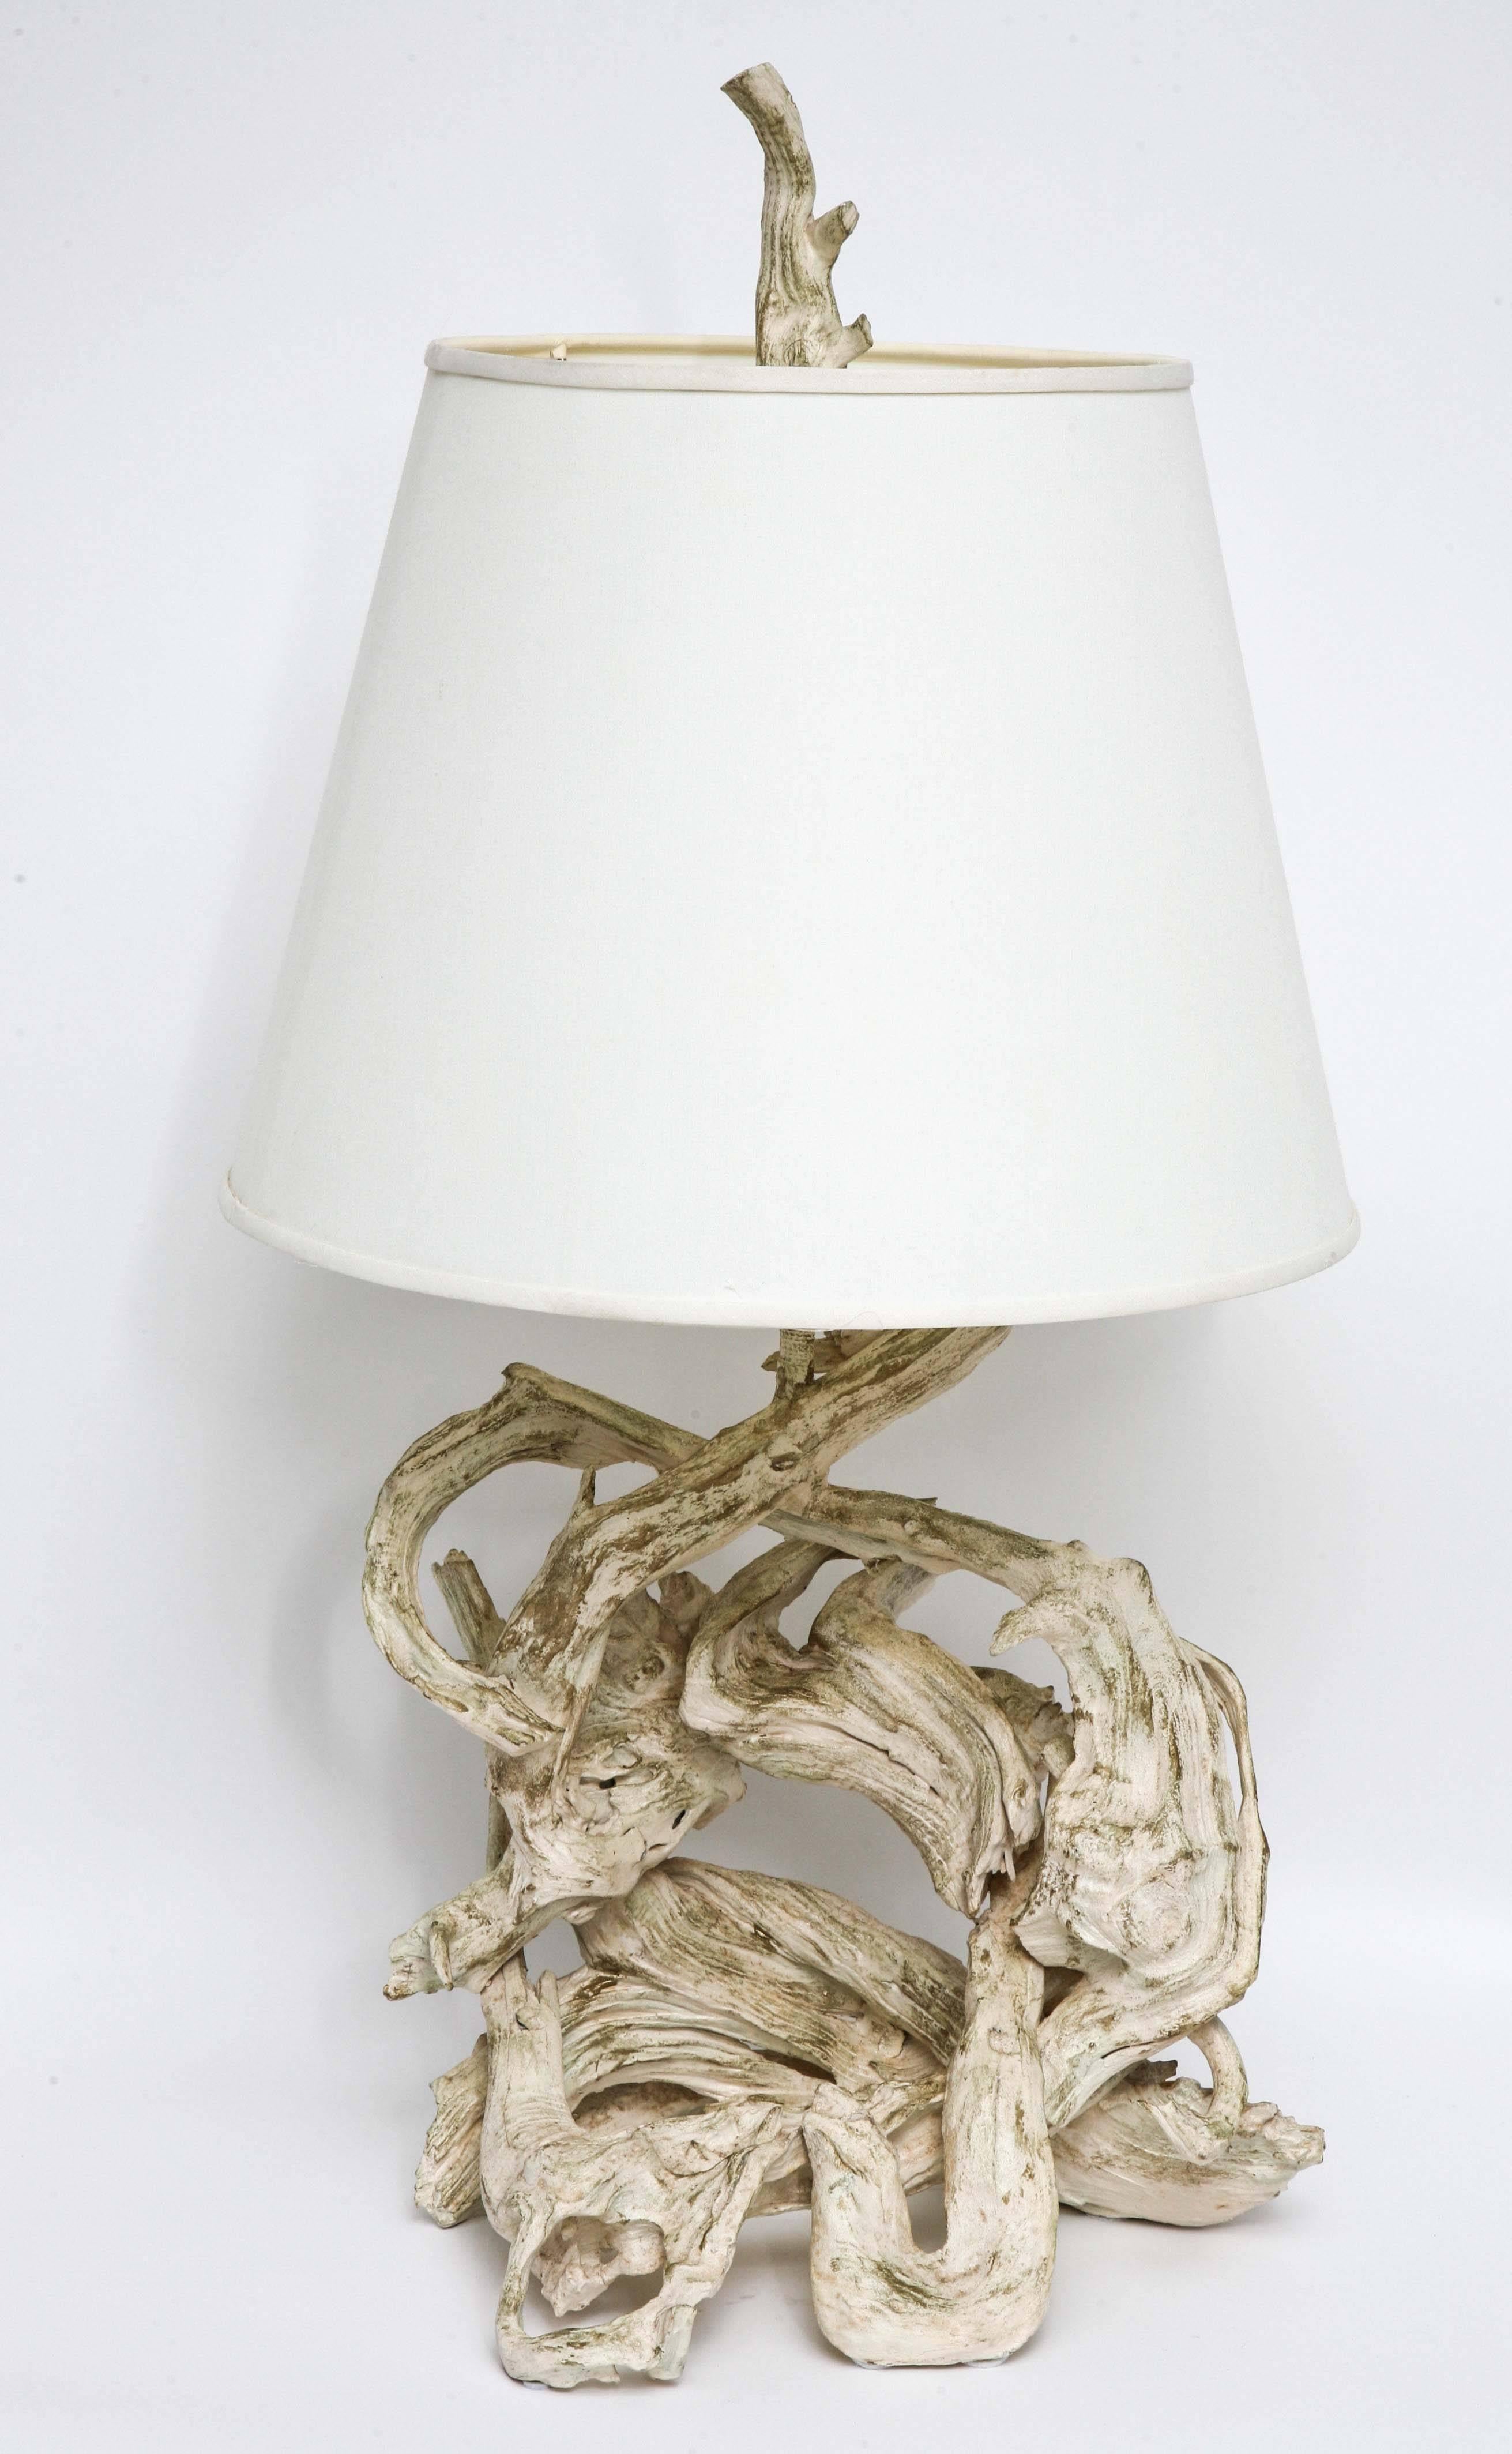 Sculptural 1950s driftwood lamp and matching finial with original white paint with gold brushed highlights, mellowed with age to cream and pale bronze. (Shade not included!).